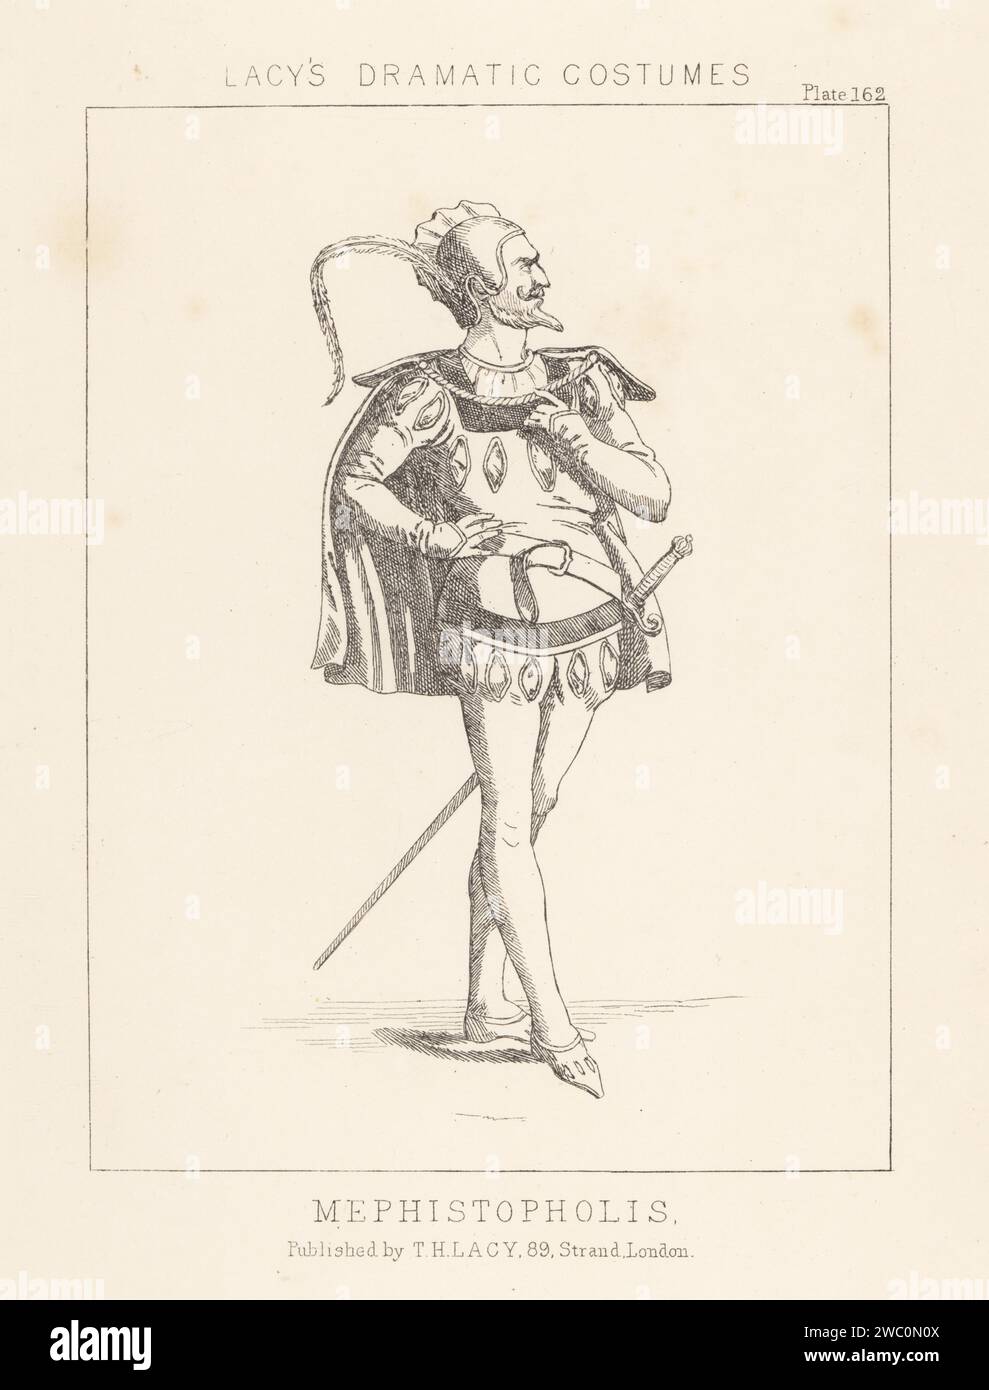 Stage costume for Mephistopheles in Charles Gounod's opera Faust, 1859. Mephistopholis. Demon in cap with long feather, short cape, tunic, hose, armed with sword. Lithograph from Thomas Hailes Lacy's Male Costumes, Historical, National and Dramatic in 200 Plates, London, 1865. Lacy (1809-1873) was a British actor, playwright, theatrical manager and publisher. Stock Photo